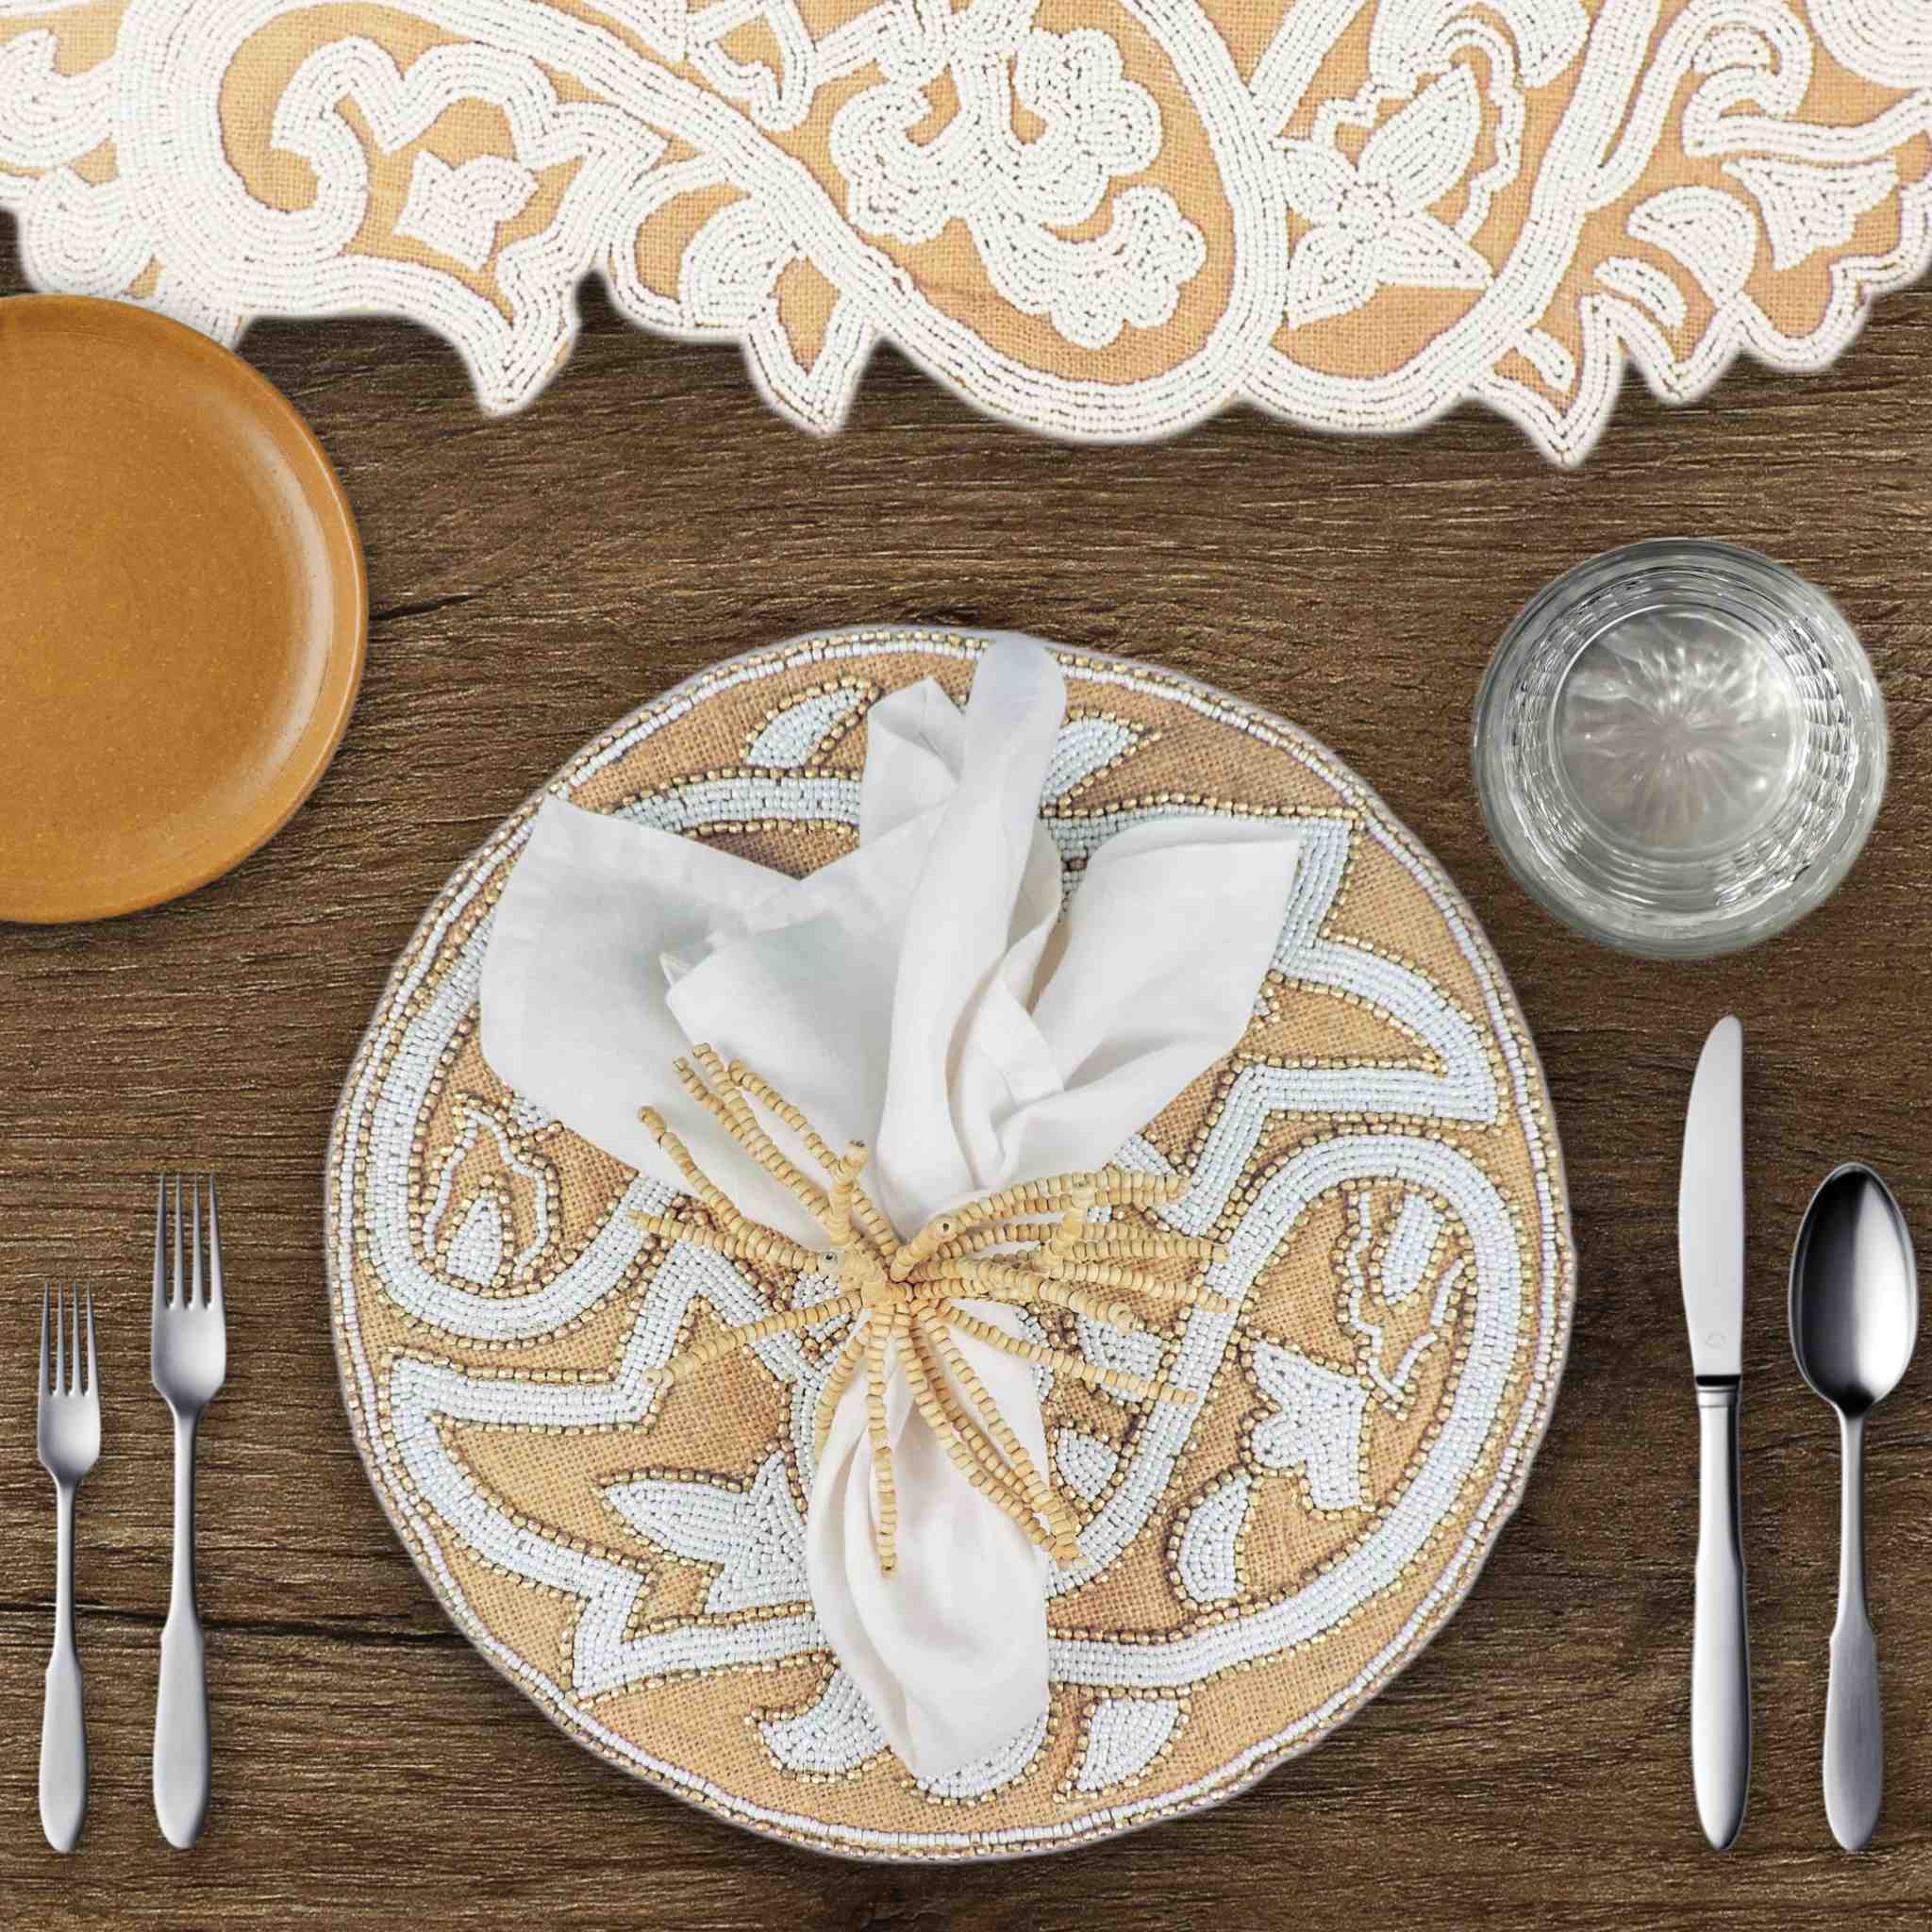 Il Pesce Glass Bead Embroidered Placemat in White & Natural, Set of 2/4